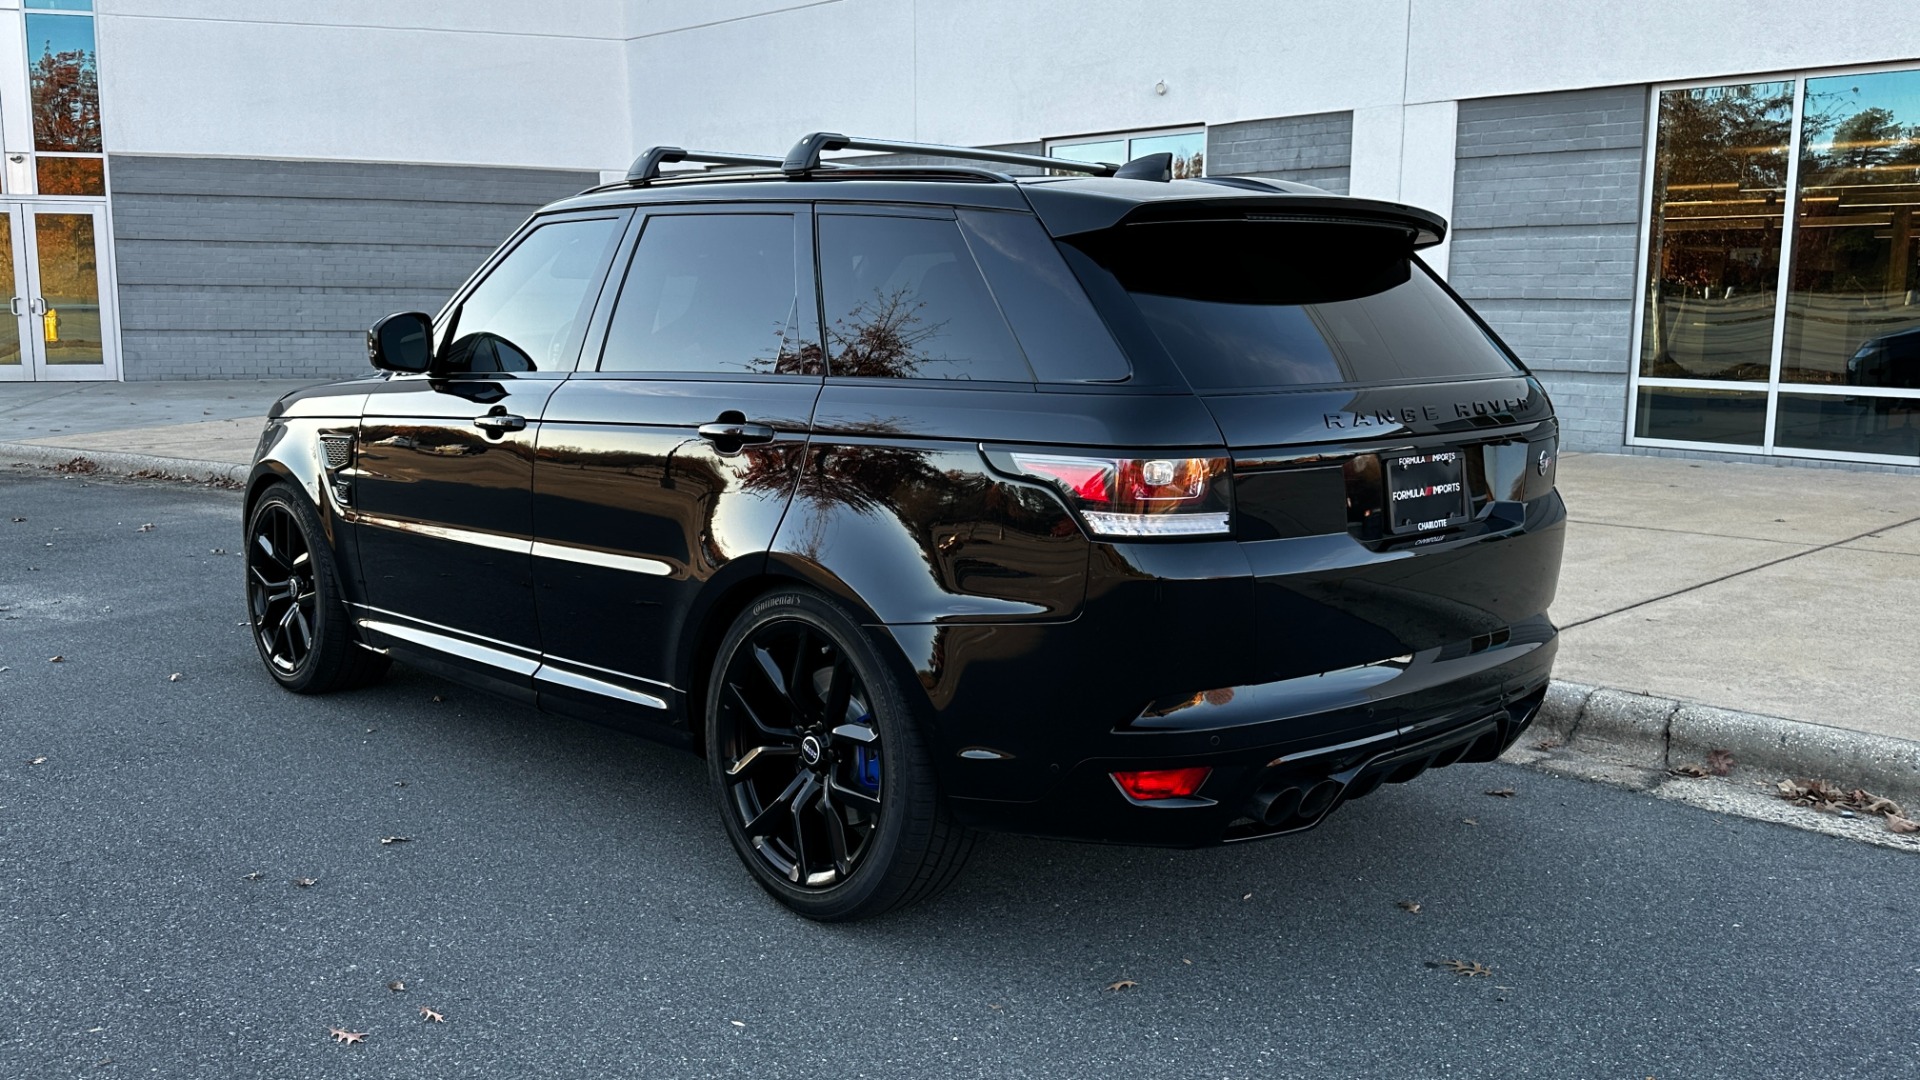 Used 2017 Land Rover Range Rover Sport SVR / DRIVE PRO PACKAGE / MERIDIAN SURROUND SOUND / SUPERCHARGED V8 / PANOR for sale $63,999 at Formula Imports in Charlotte NC 28227 6